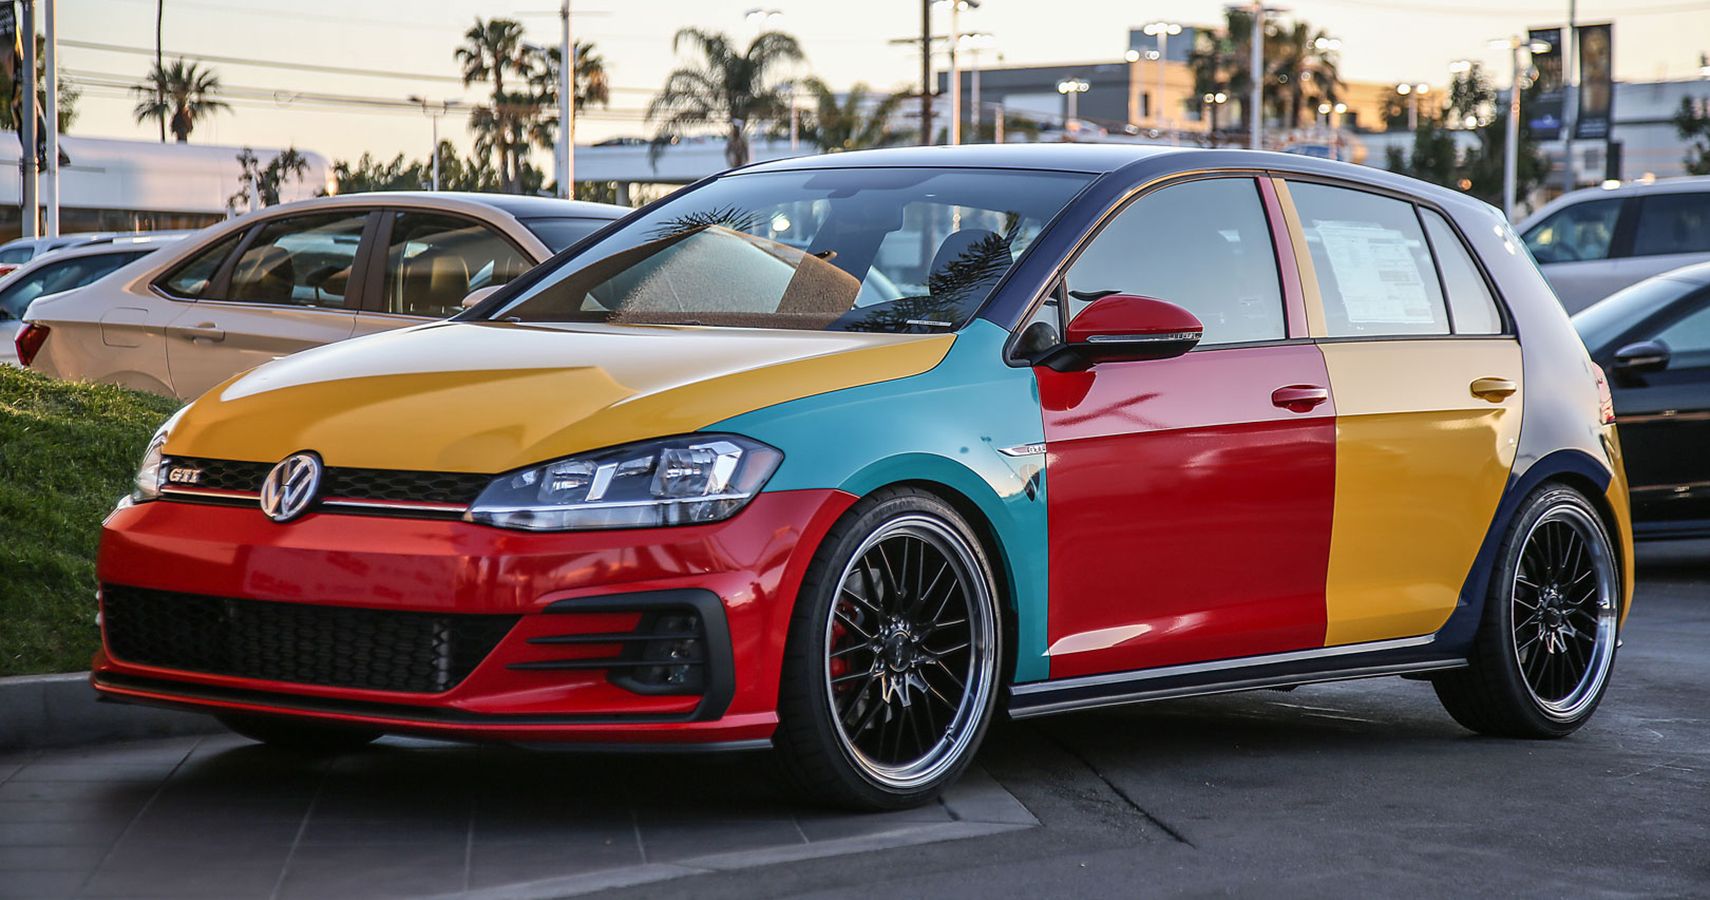 Volkswagen Polo (and Golf) Harlequin: When Color Is Hard To Decide